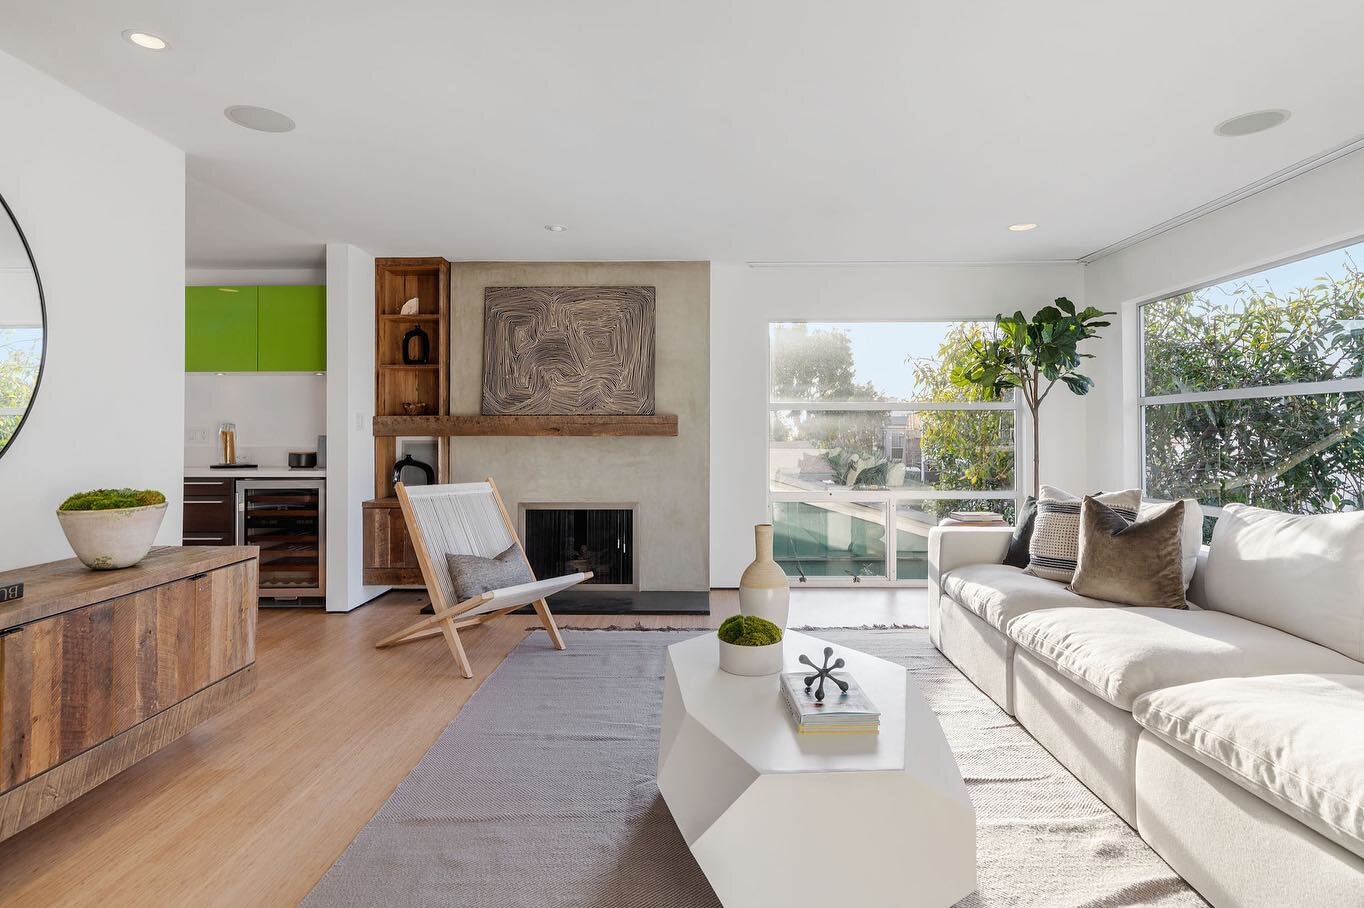 We get your home Market Ready with our Property Enhancement and Staging Services. Get top dollar for your home by stepping out on the market with your best foot forward. Swipe to see this living room before Enhancement &amp; Staging!

#realestate #se